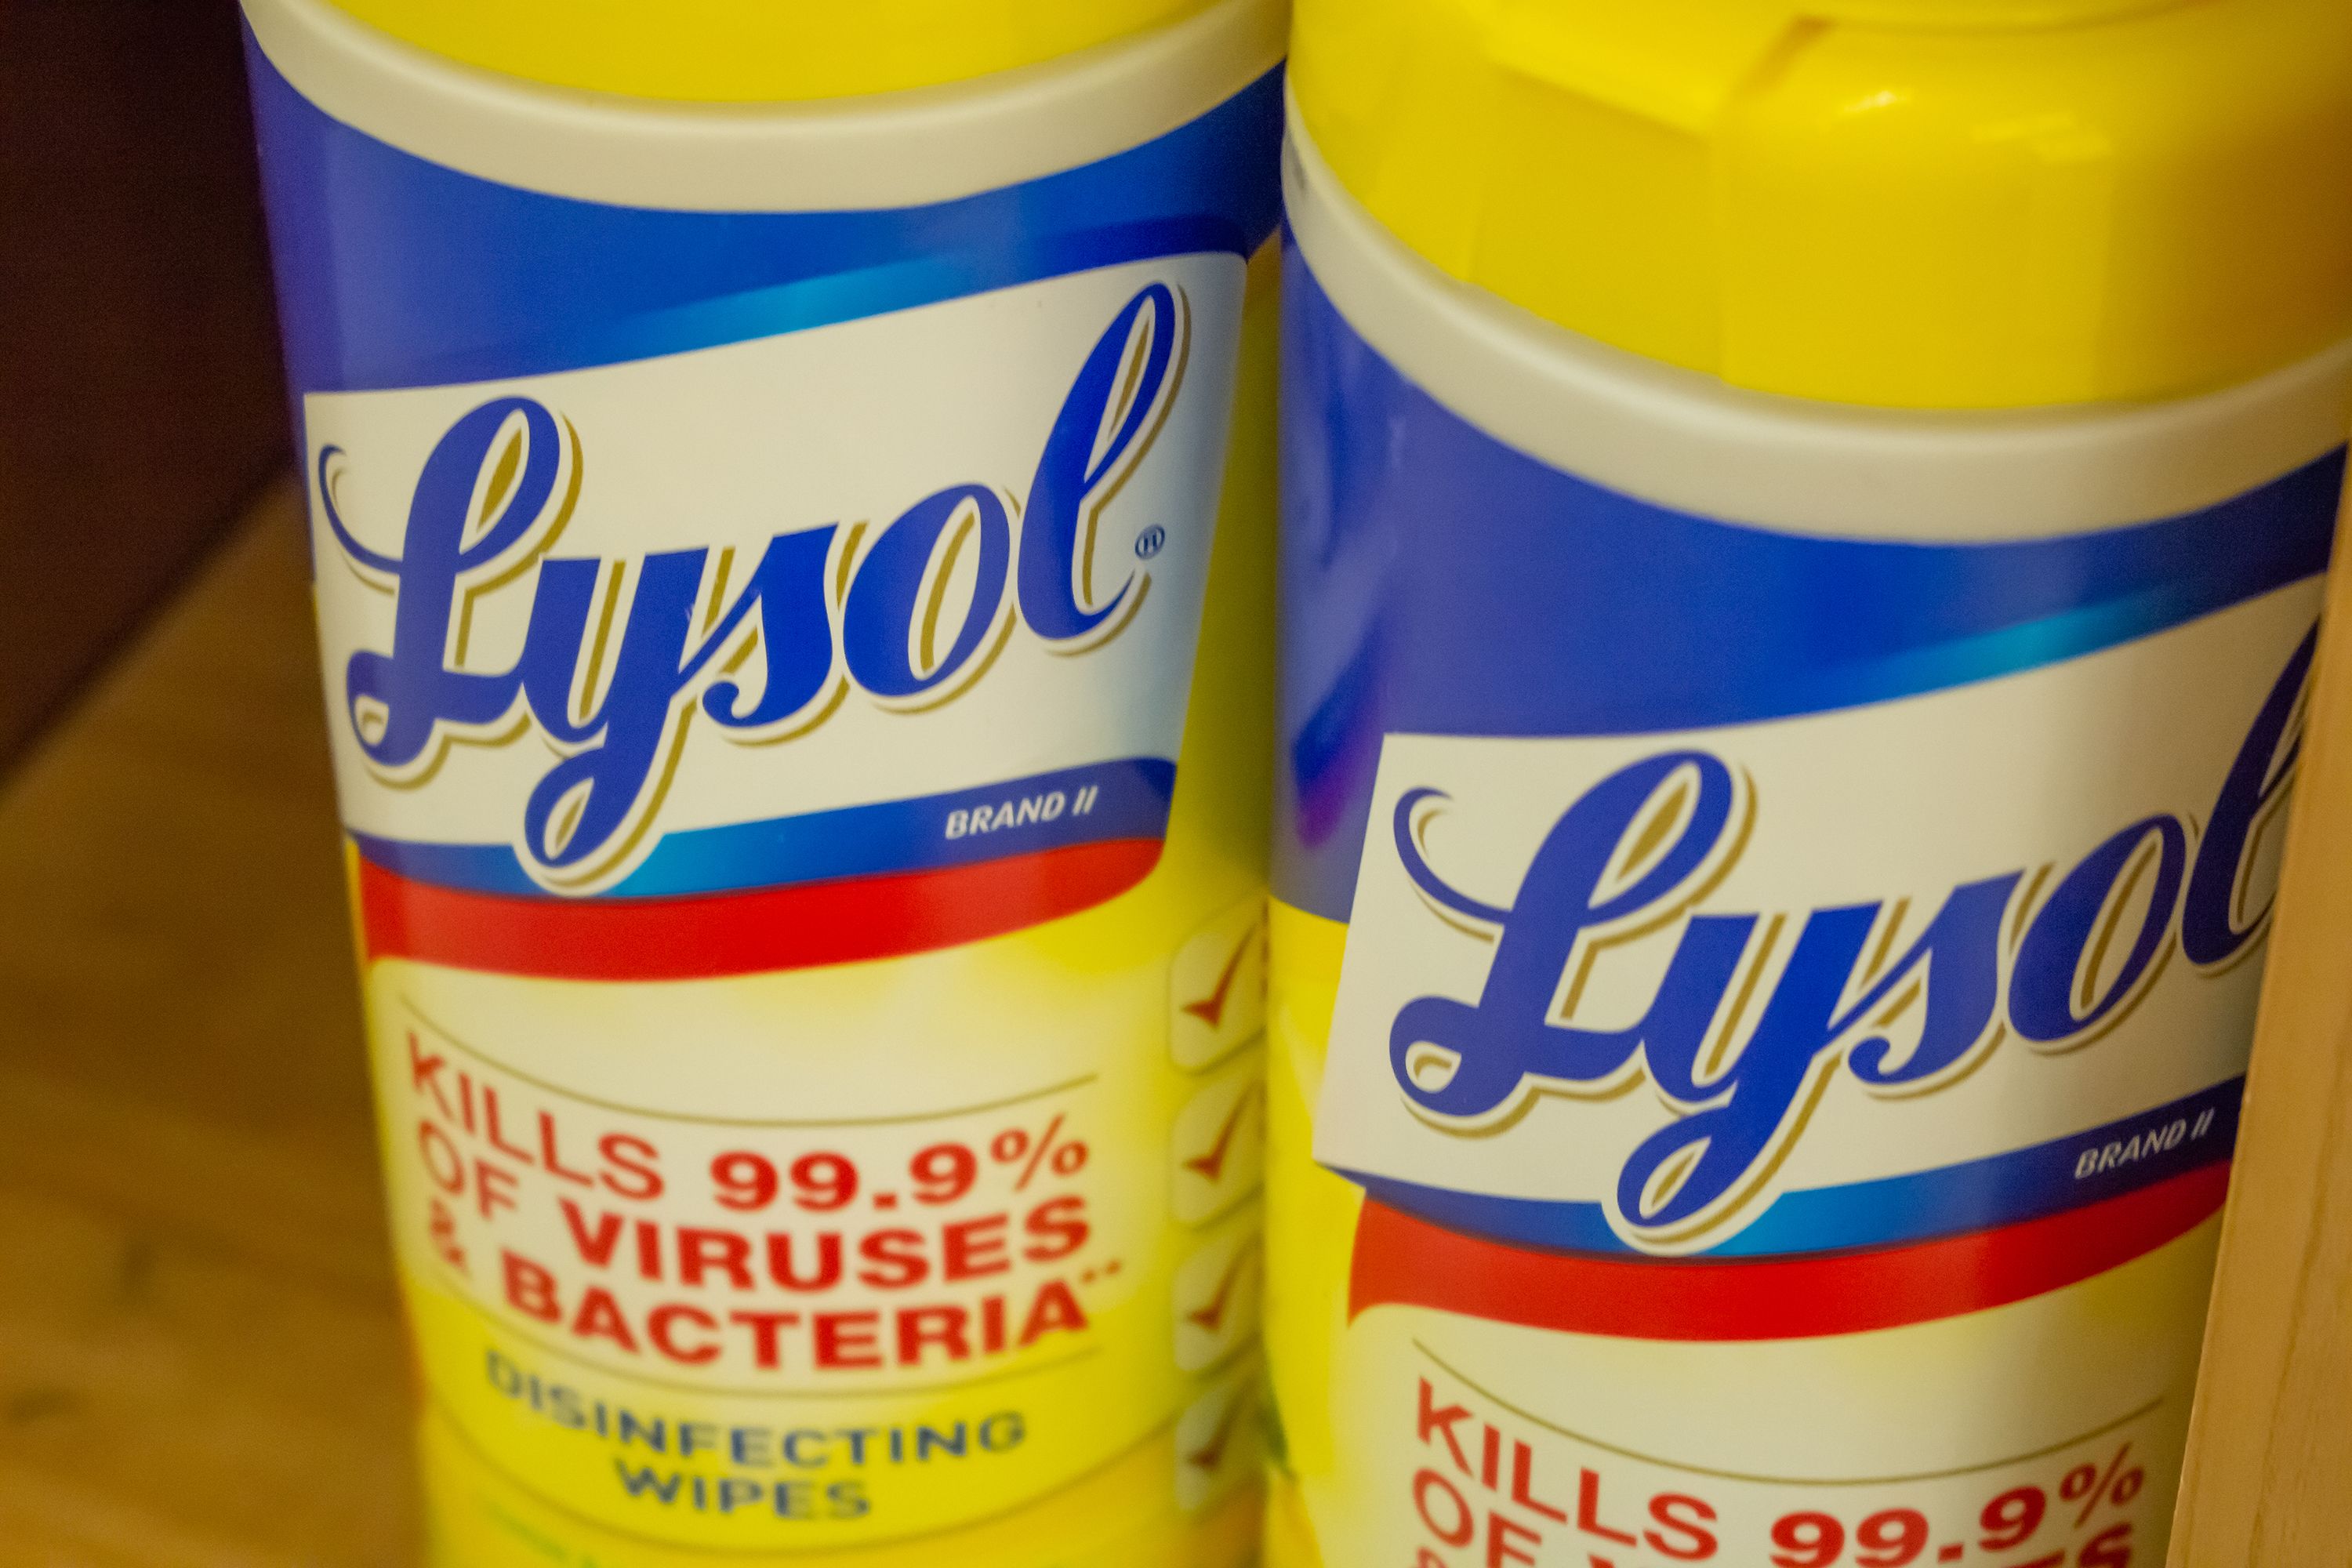 LYSOL® LAUNCHES AIR SANITIZER, THE FIRST AIR-CARE PRODUCT THAT KILLS 99.9%  OF AIRBORNE VIRUSES AND BACTERIA